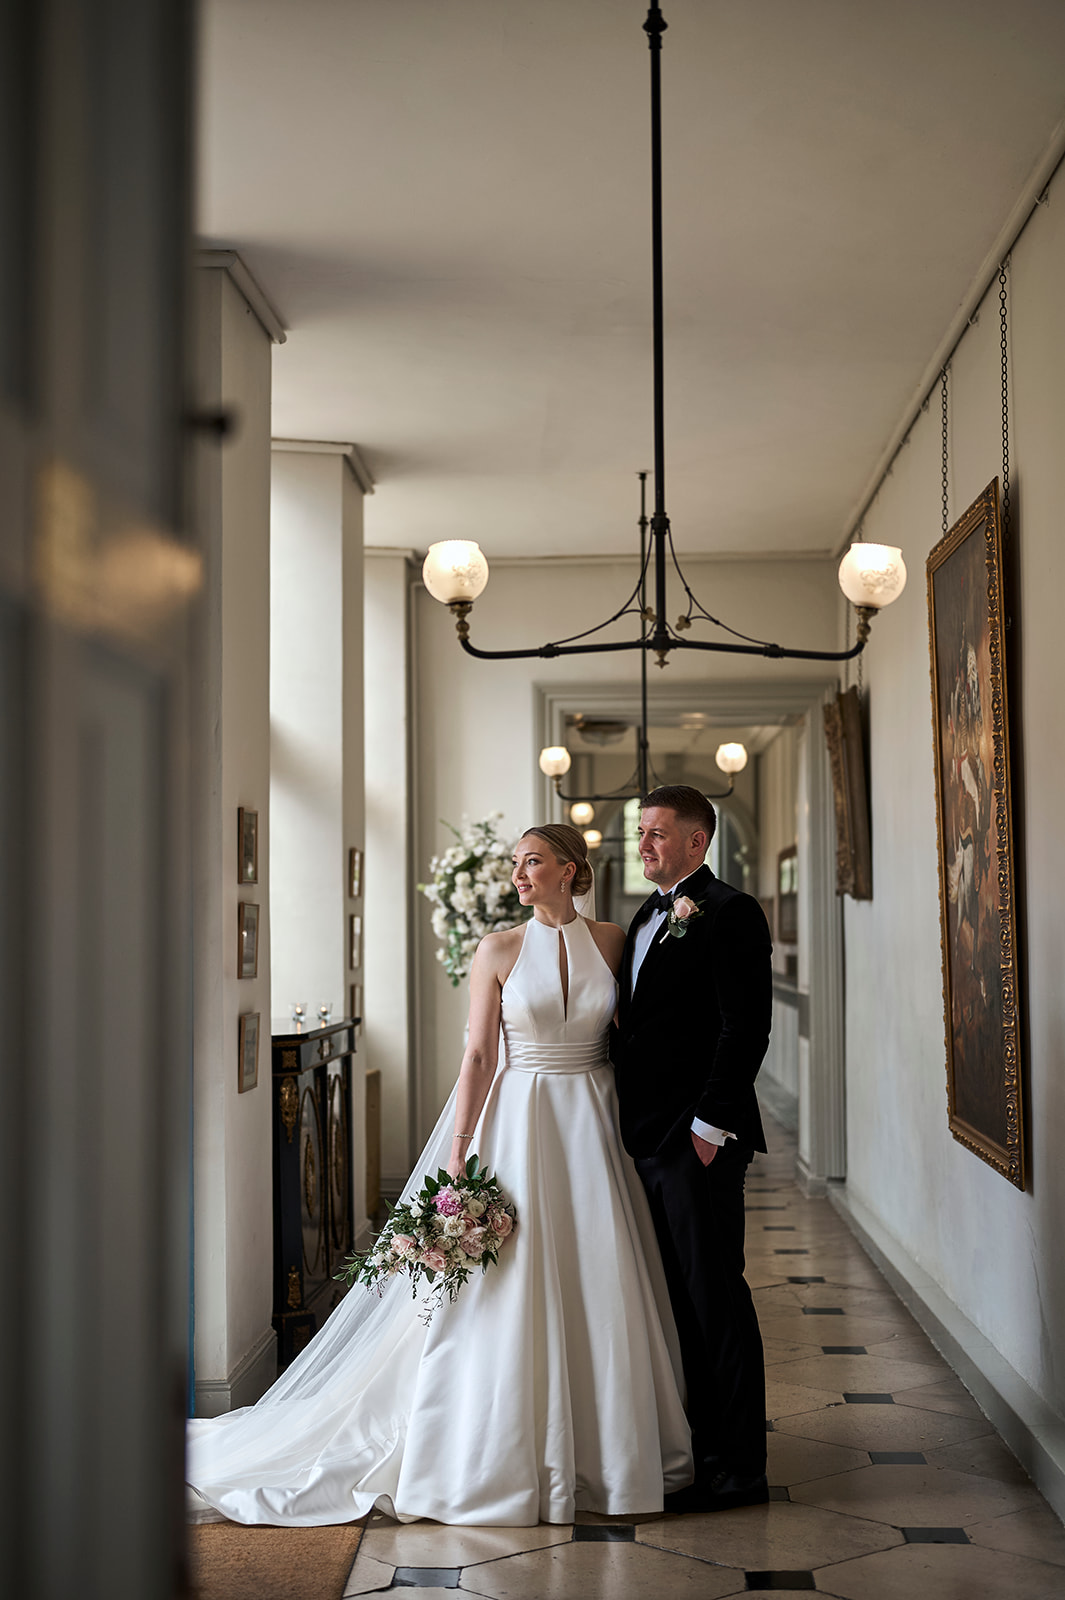 WEDDING COUPLE AT GOSFIELD HALL - RACHEL REEVE PHOTOGRAPHY